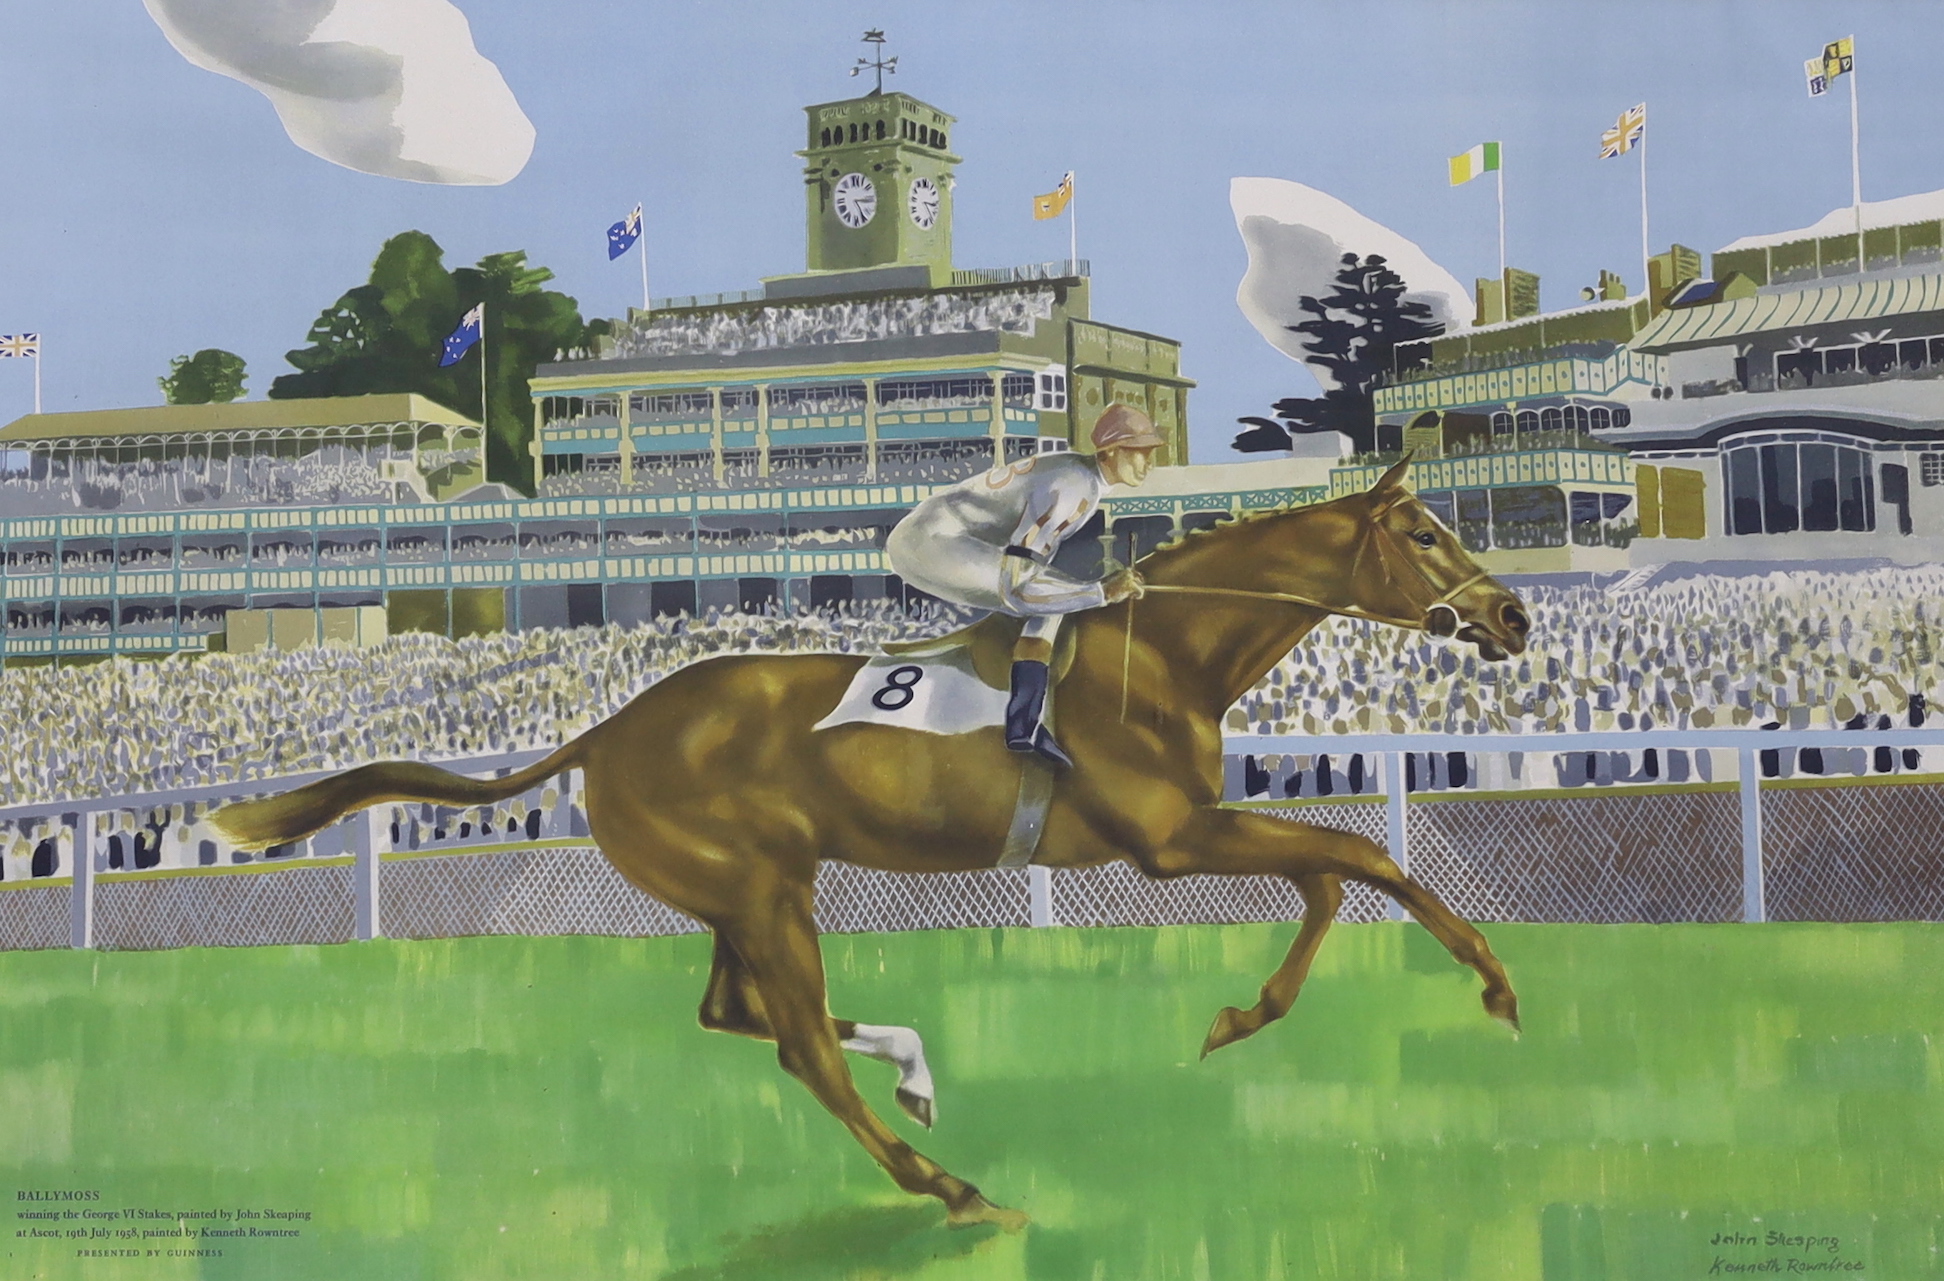 John Skeaping (1901-1980) A Guinness Sporting Print, colour lithograph, Ballymoss winning George VI stakes, printed by Curwen Press, 72 x 49cm